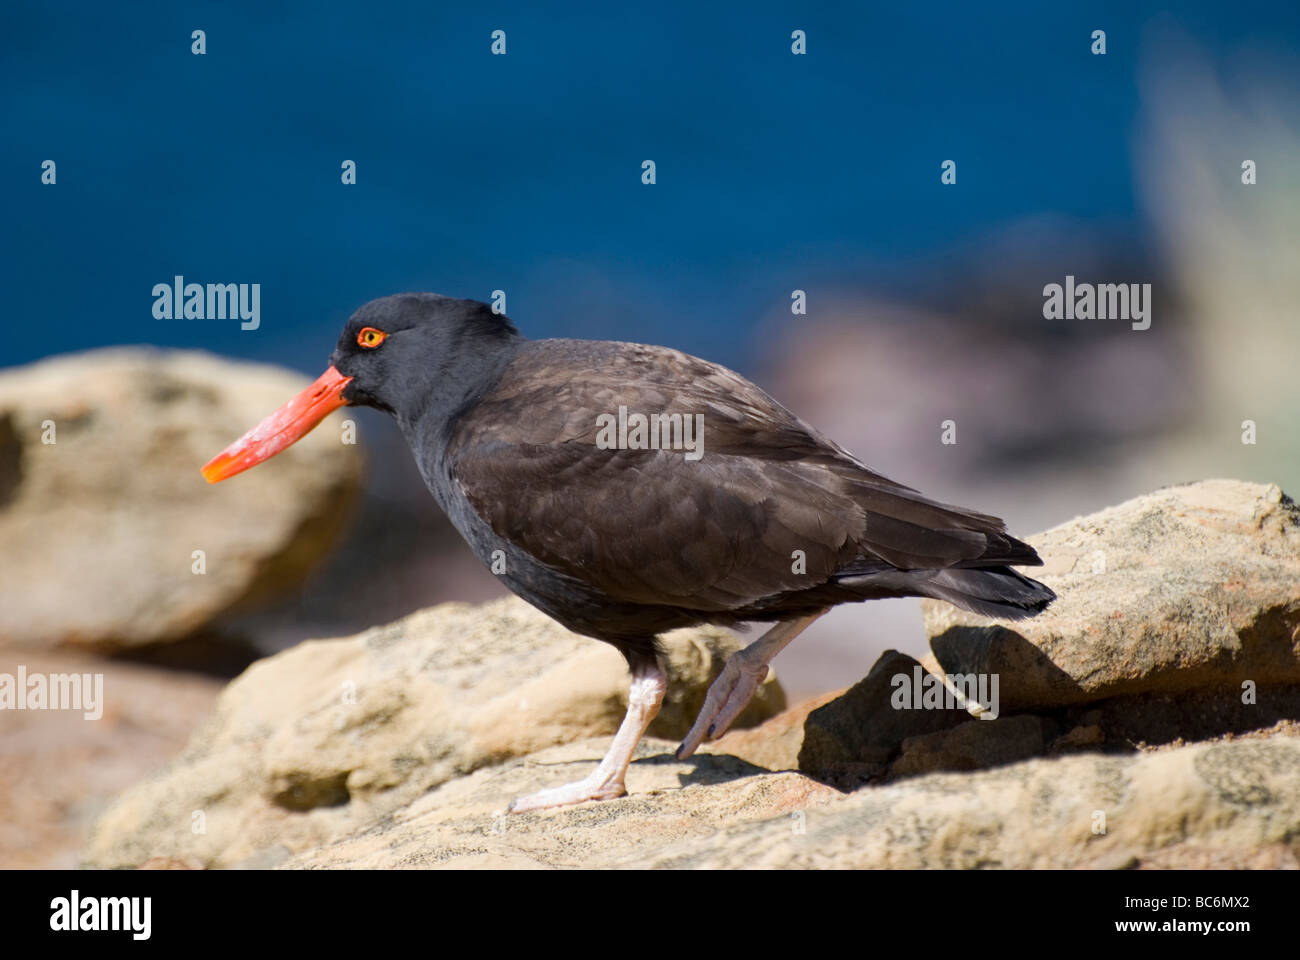 Blackish Oystercatcher, Haematopus ater, on a rock coast. Also known as a Black curlew or Black Oystercatcher Stock Photo